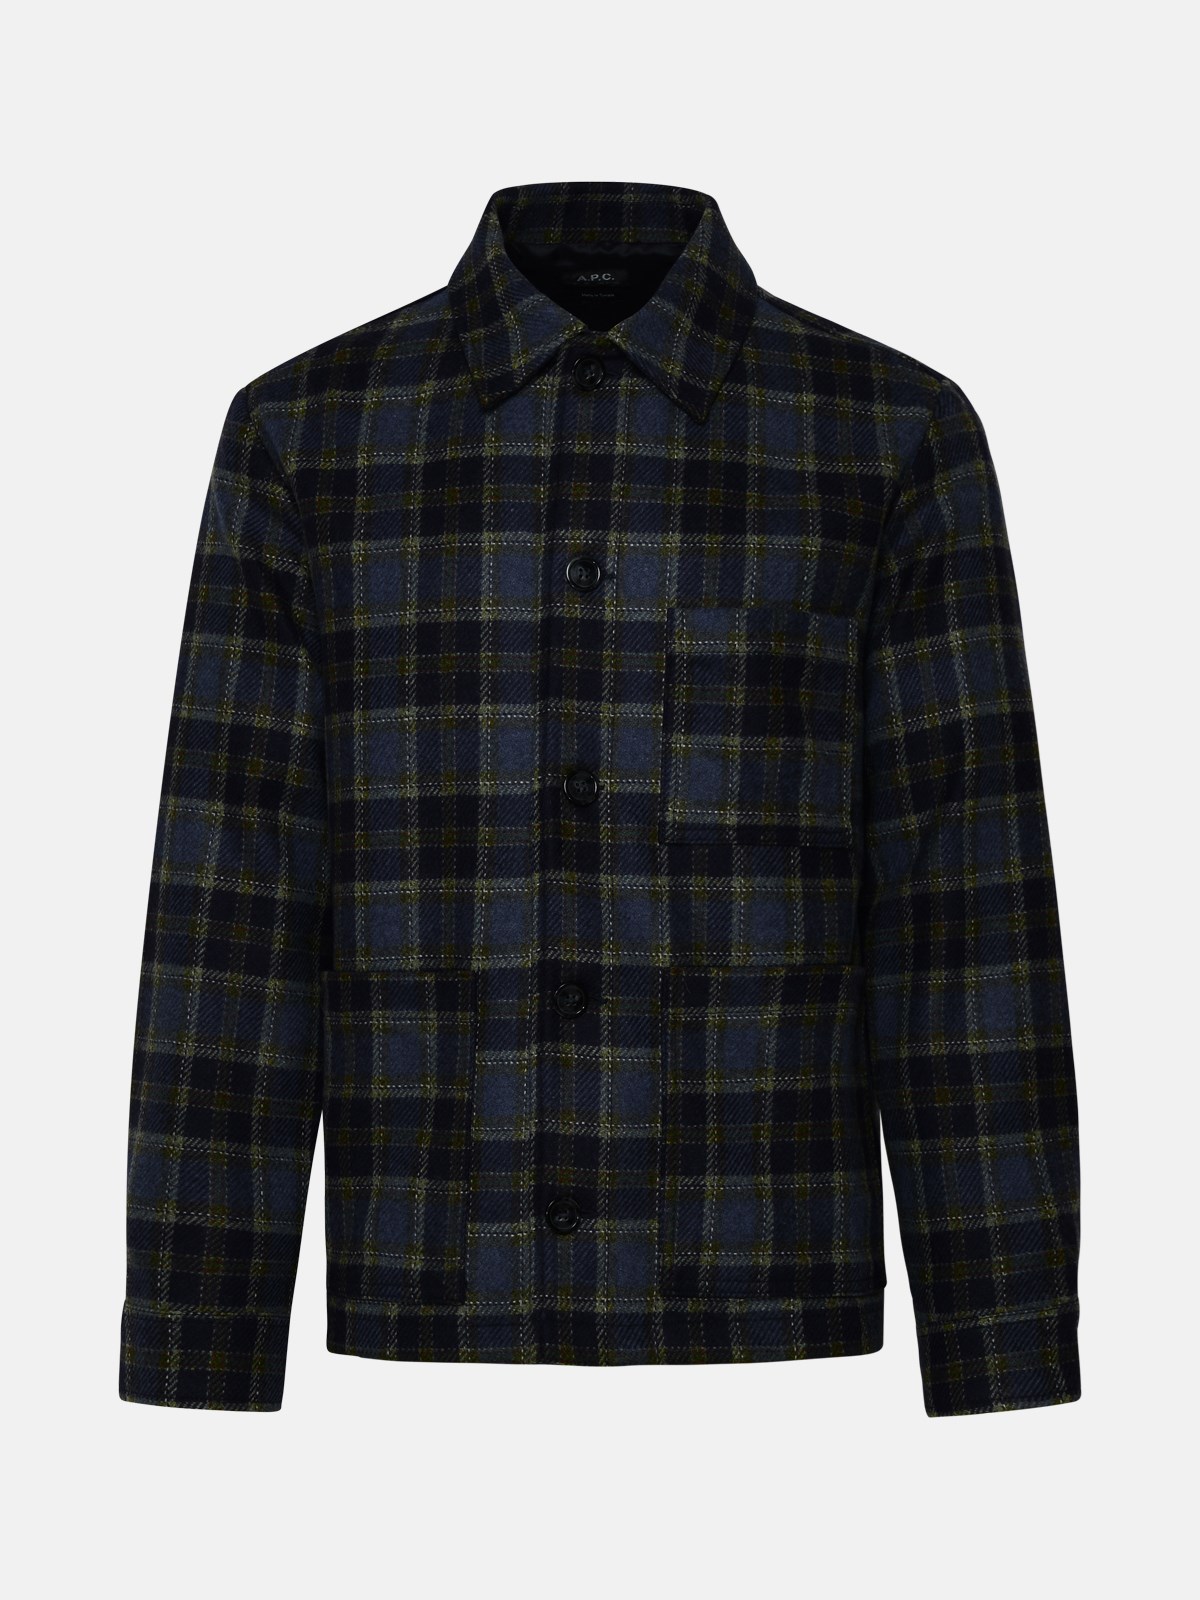 Apc Blue Wool Blend New Emile Shirt In Navy